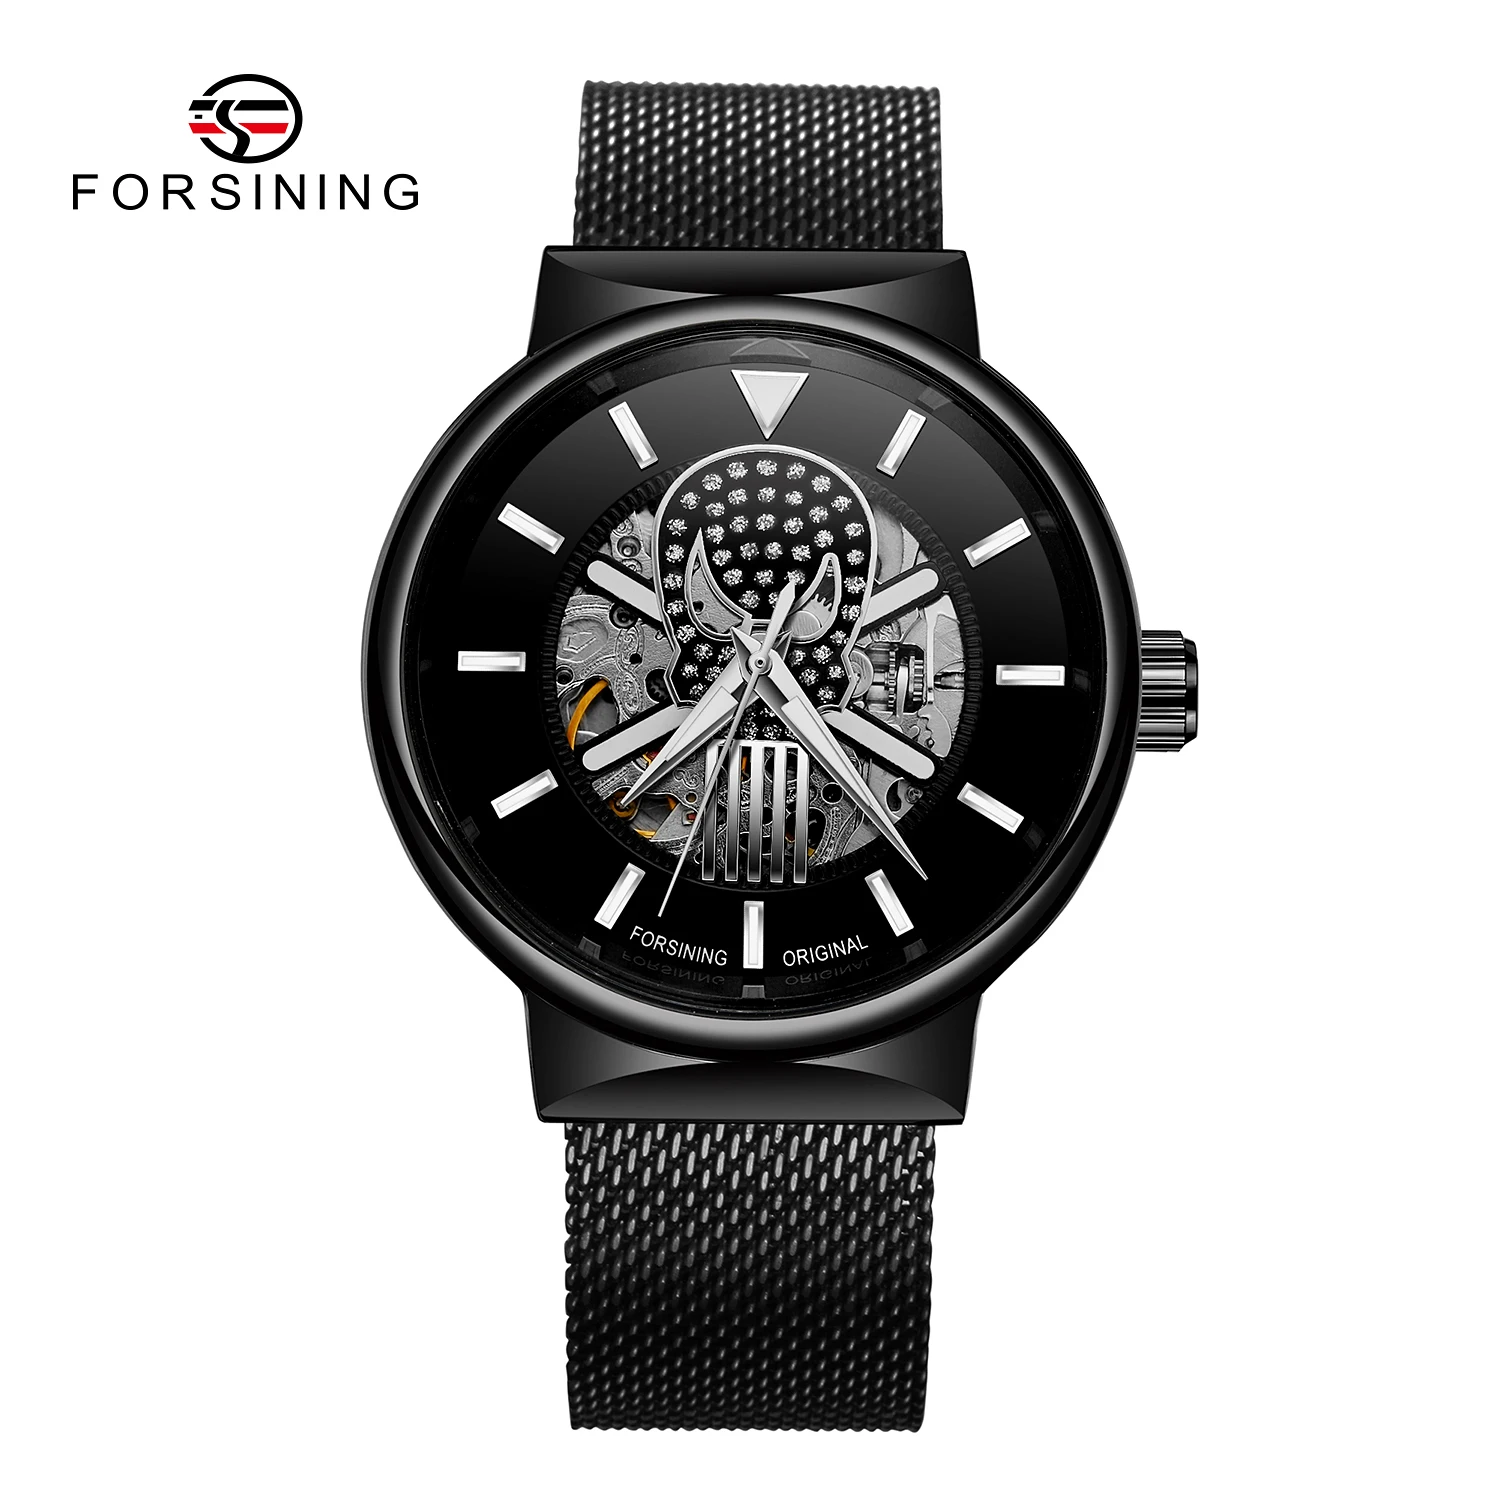 

Forsining Skull Mechanical Watches Engraved Movement Luminous Hands Mesh Stainless Steel Band Black Skeleton Automatic Men Watch